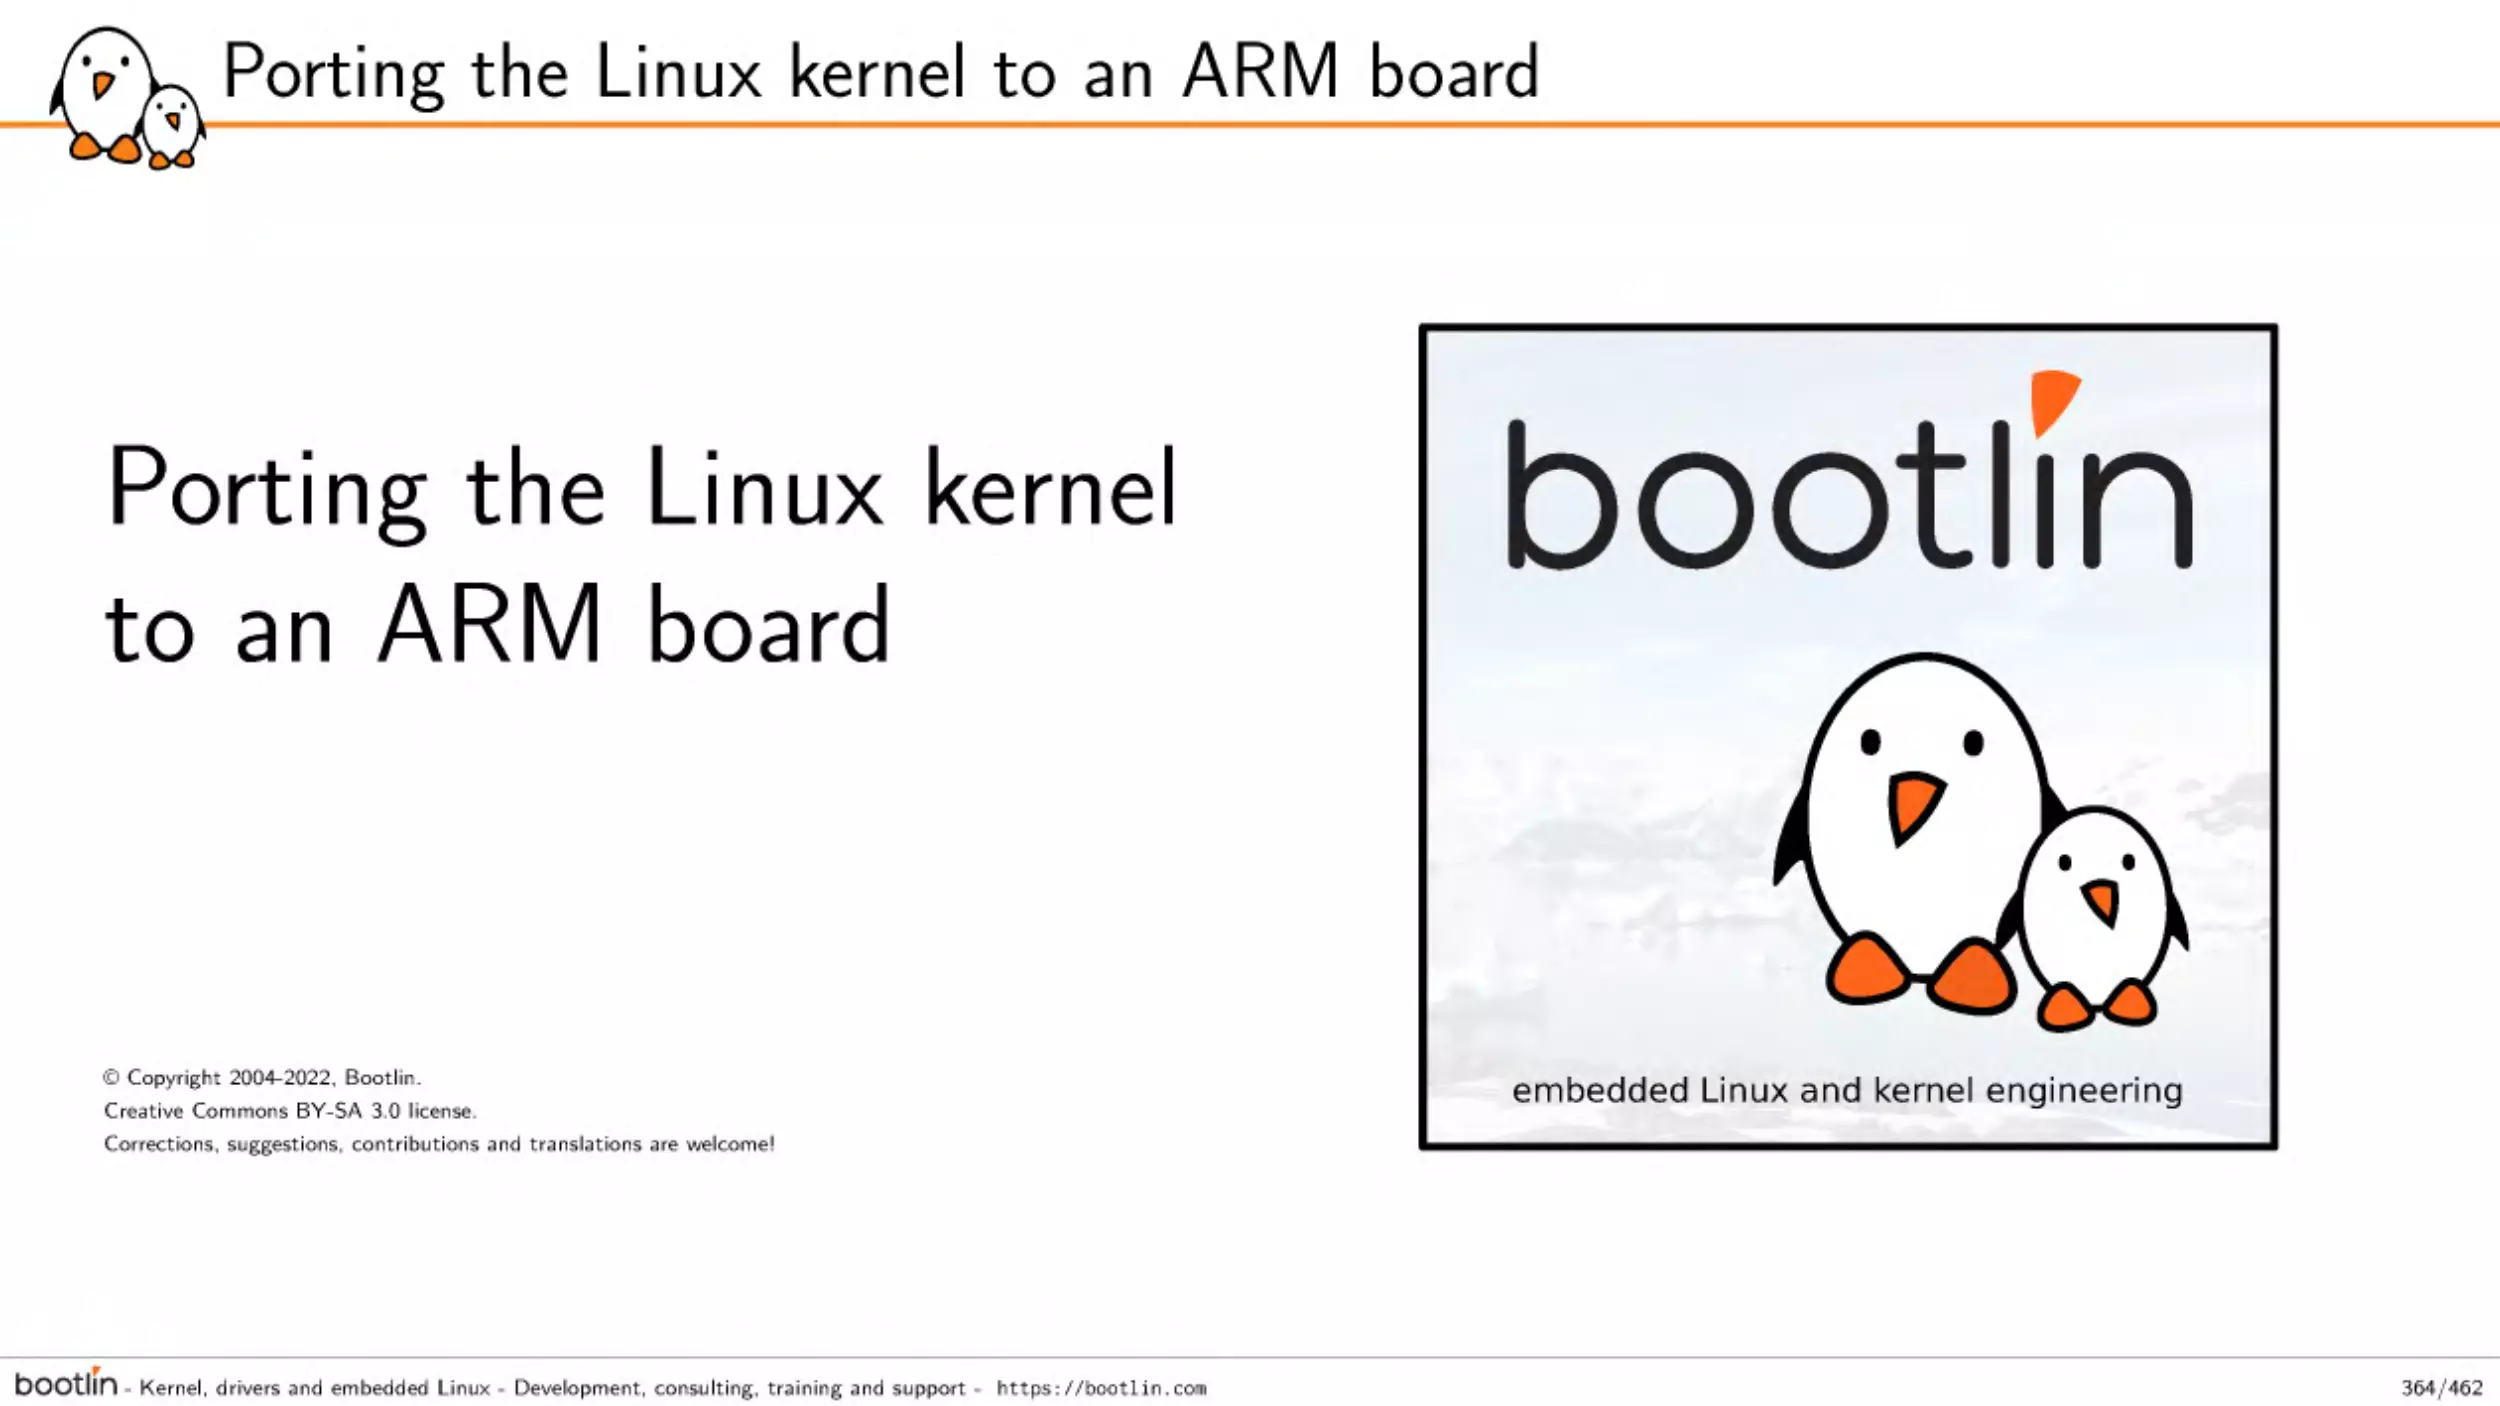 Porting the Linux kernel to an ARM board